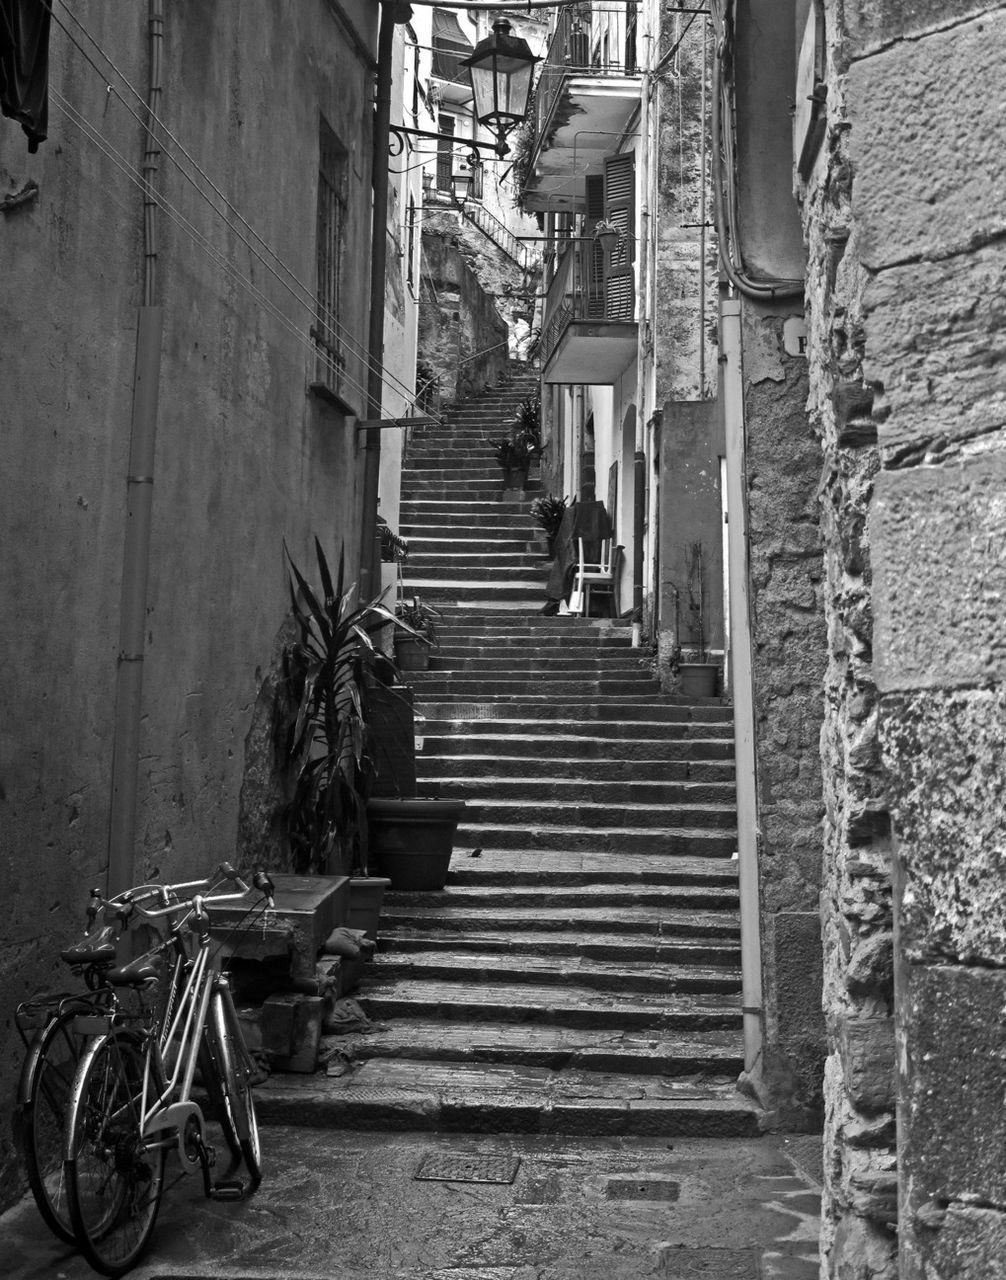 Bicycle on steps in city